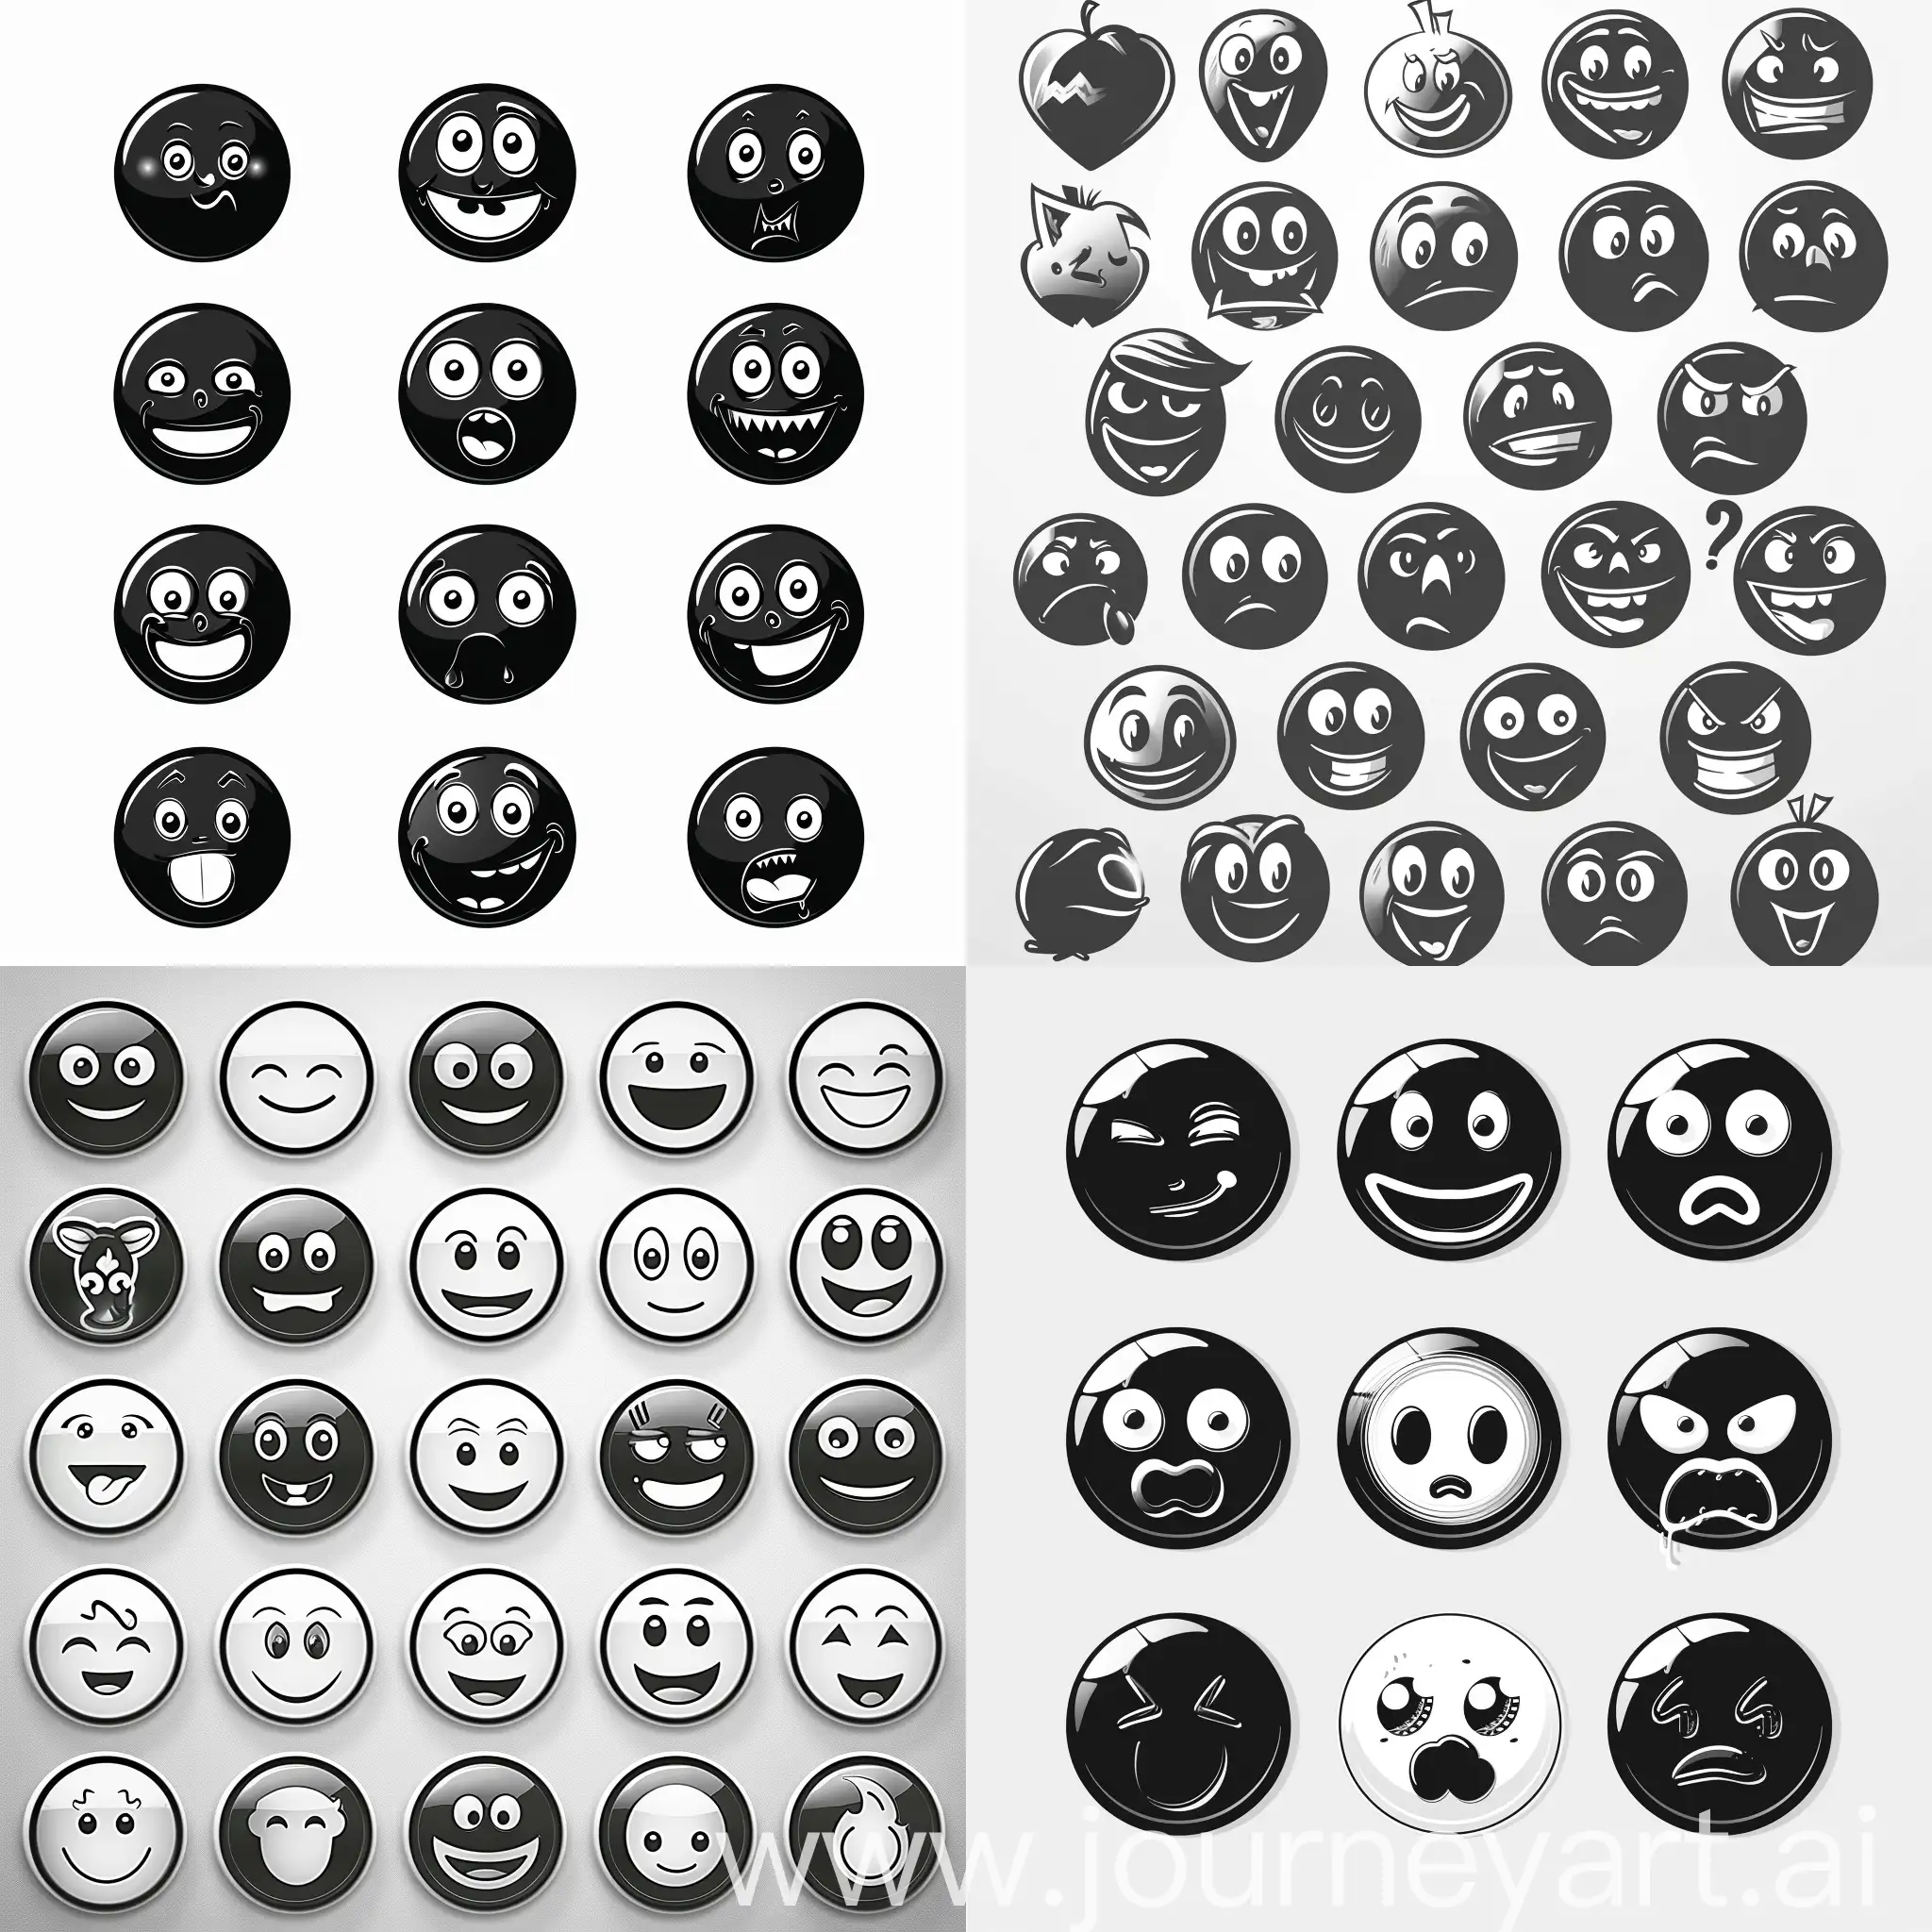 Monochrome-Emoji-Pack-with-6-Variations-in-11-Aspect-Ratio